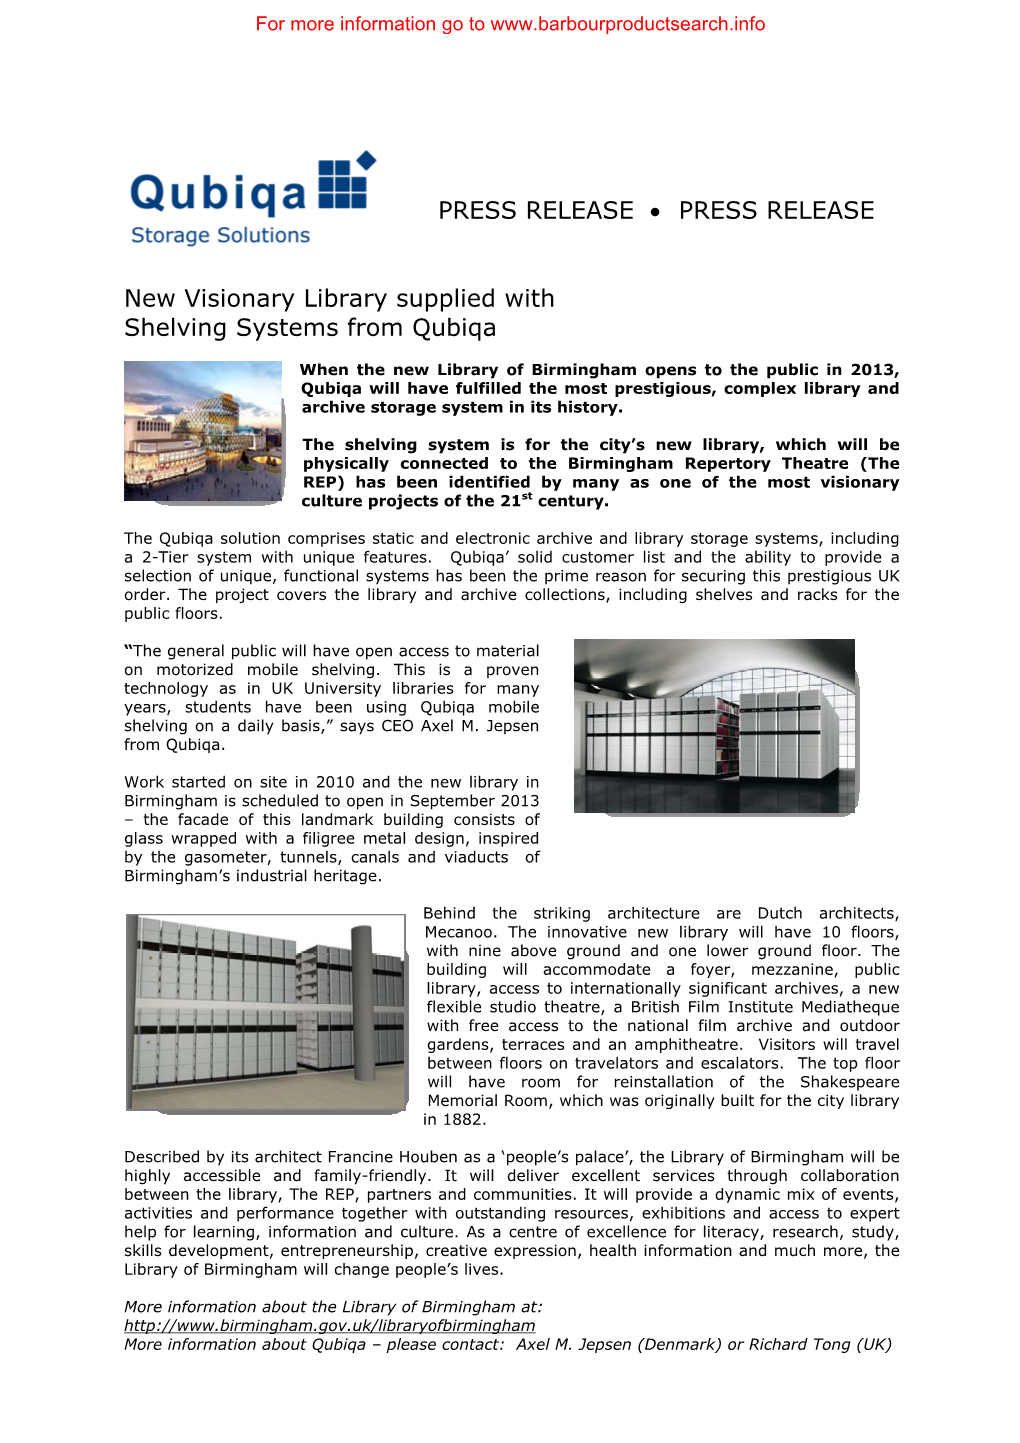 New Visionary Library Supplied with Shelving Systems from Qubiqa